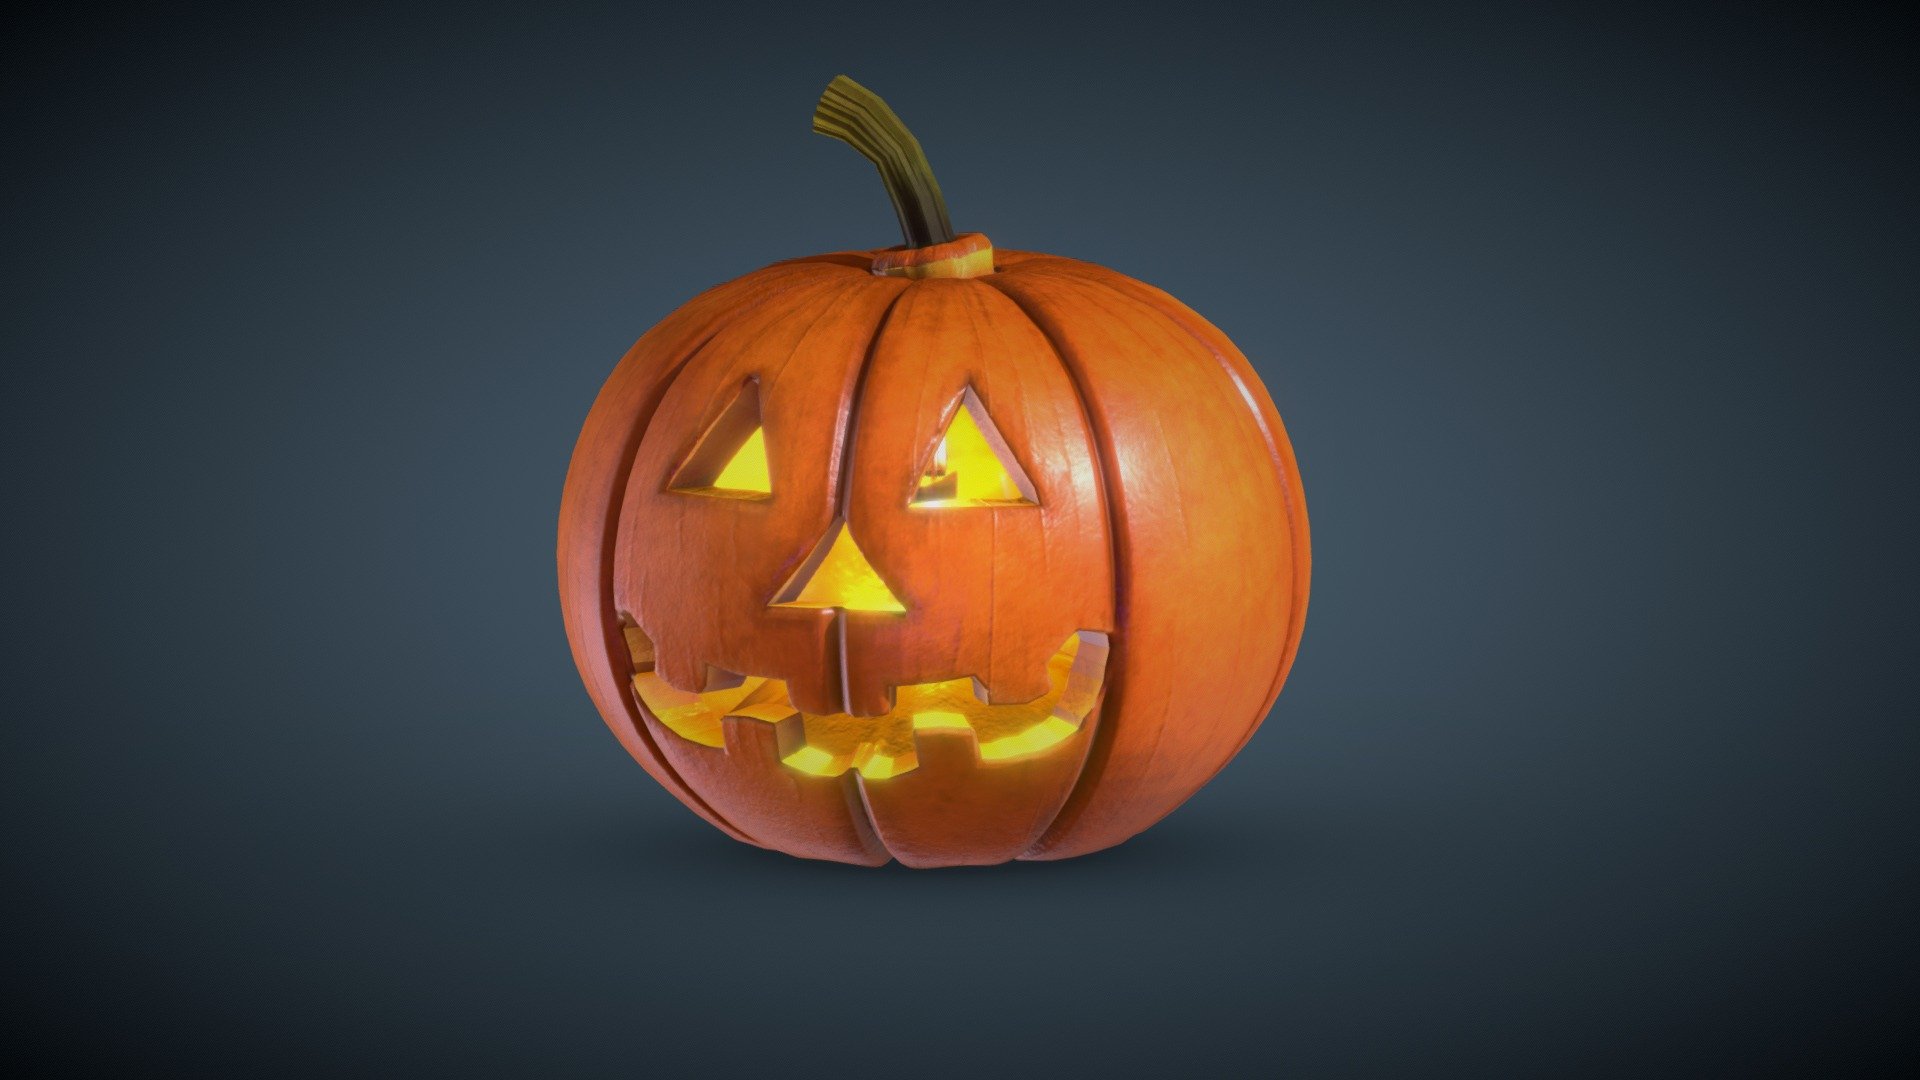 Personal project,

Pumpking inspired by the festivities of halloween.
Modeled in maya.
Textured in substance painter 3d model